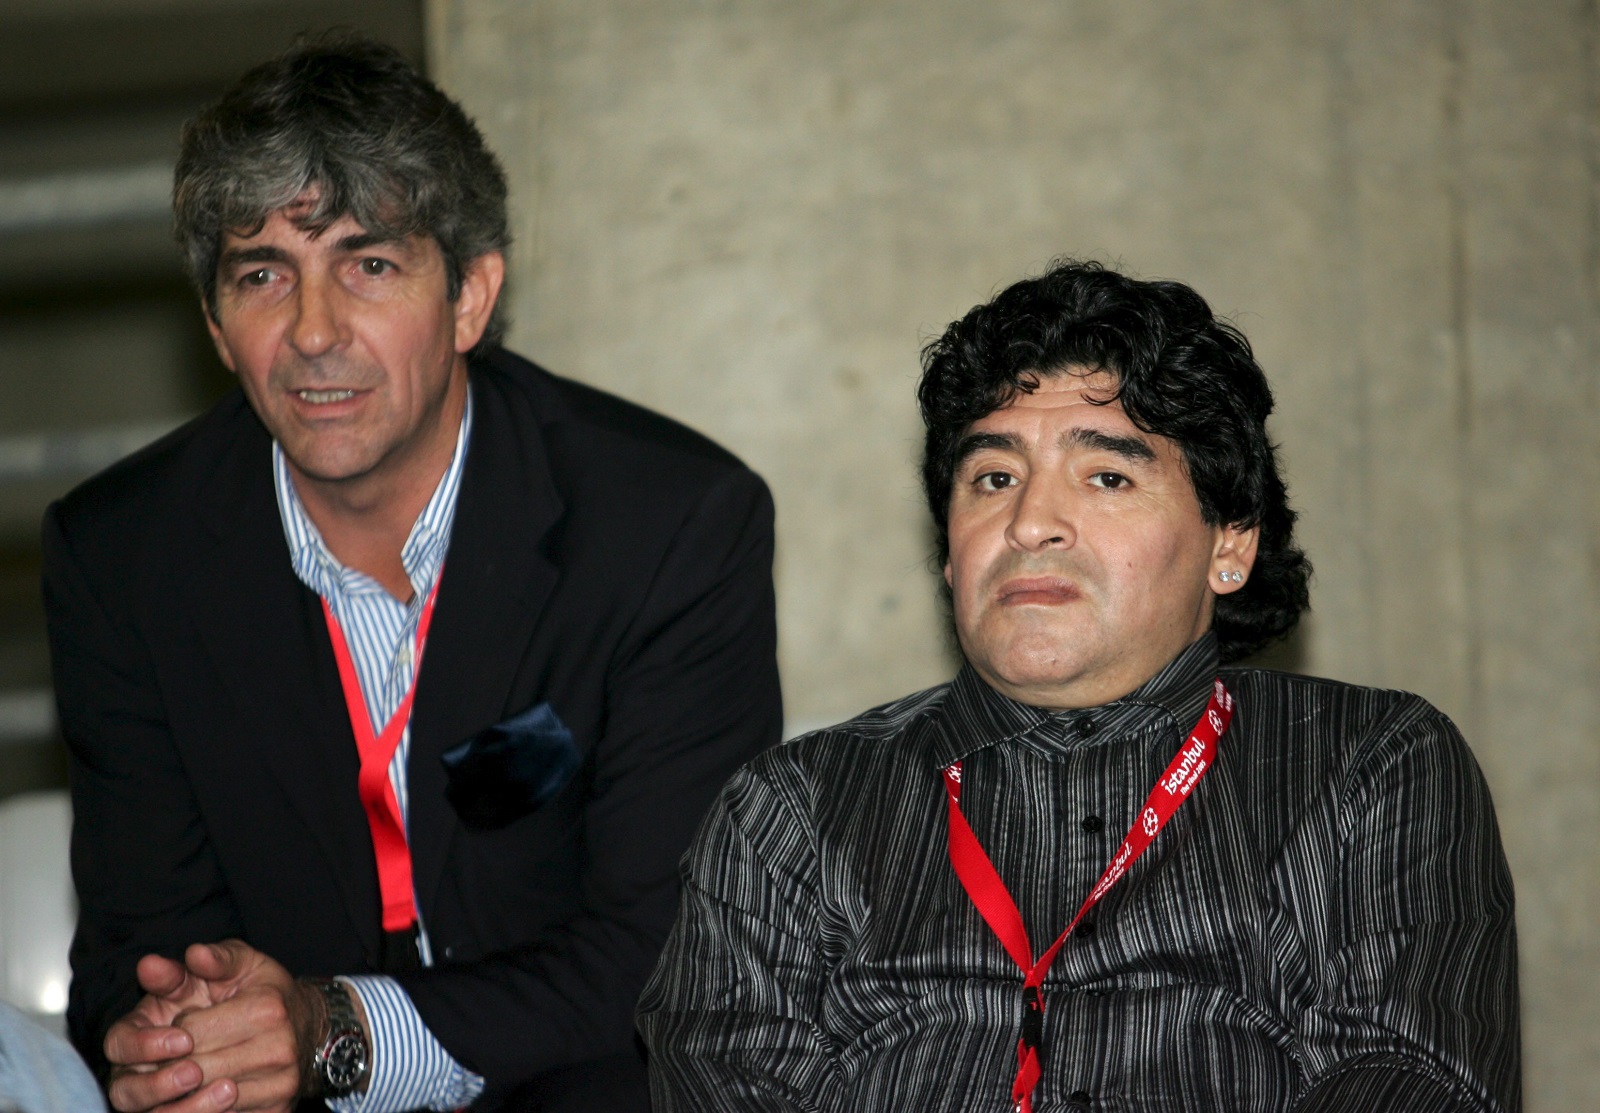 epa08873619 (FILE) - Former Argentinian soccer star Diego Maradona (R) and former Italian striker Paolo Rossi (L) watch a training session of AC Milan at Ataturk Olympic Stadium in Istanbul, Tuesday 24 May 2005 (reissued 10 December 2020). According to news reports, Paolo Rossi died aged 64 on 09 December 2020. As part of FIFA's 100th anniversary, in 2004 Rossi was named as one of the Top 125 greatest living footballers.  EPA/DANIEL DAL ZENNARO